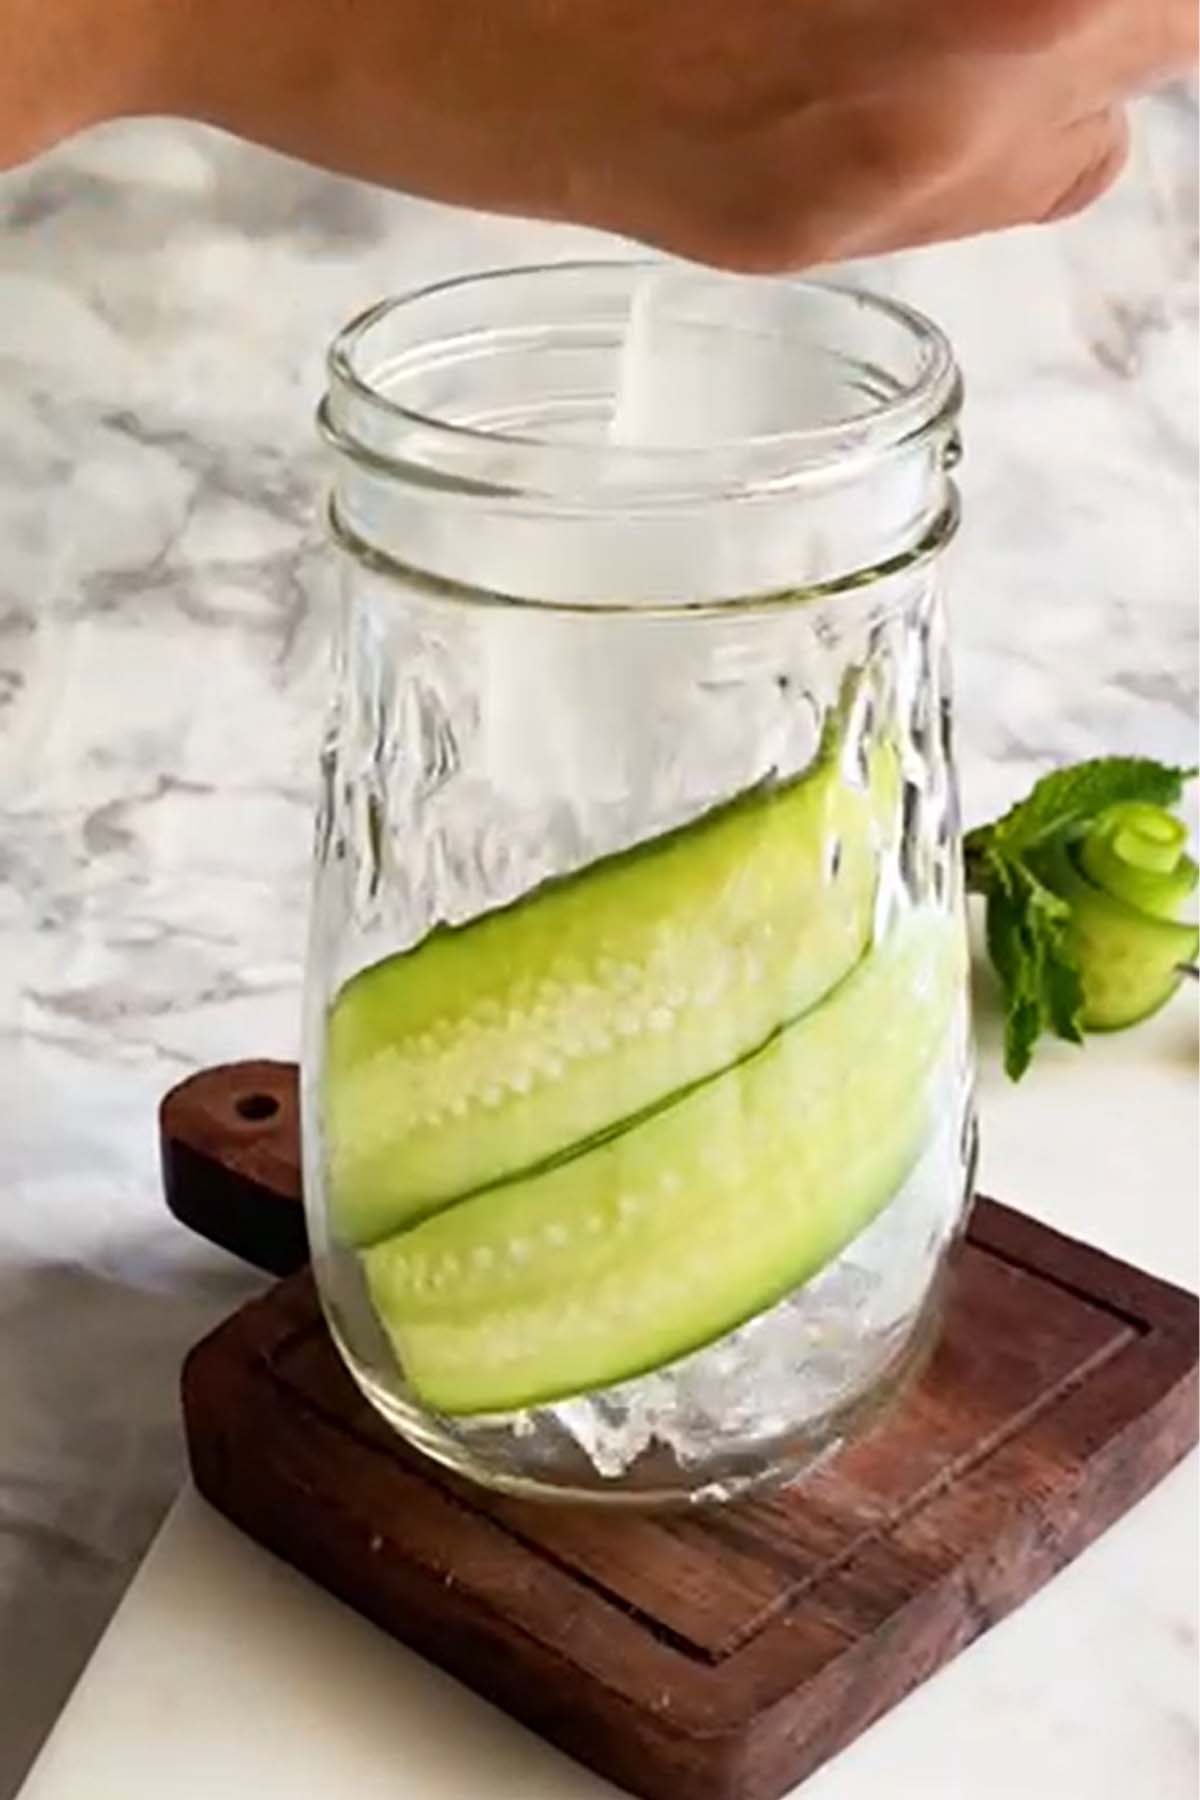 Ice is dropped into a glass with cucumber ribbons along the side.